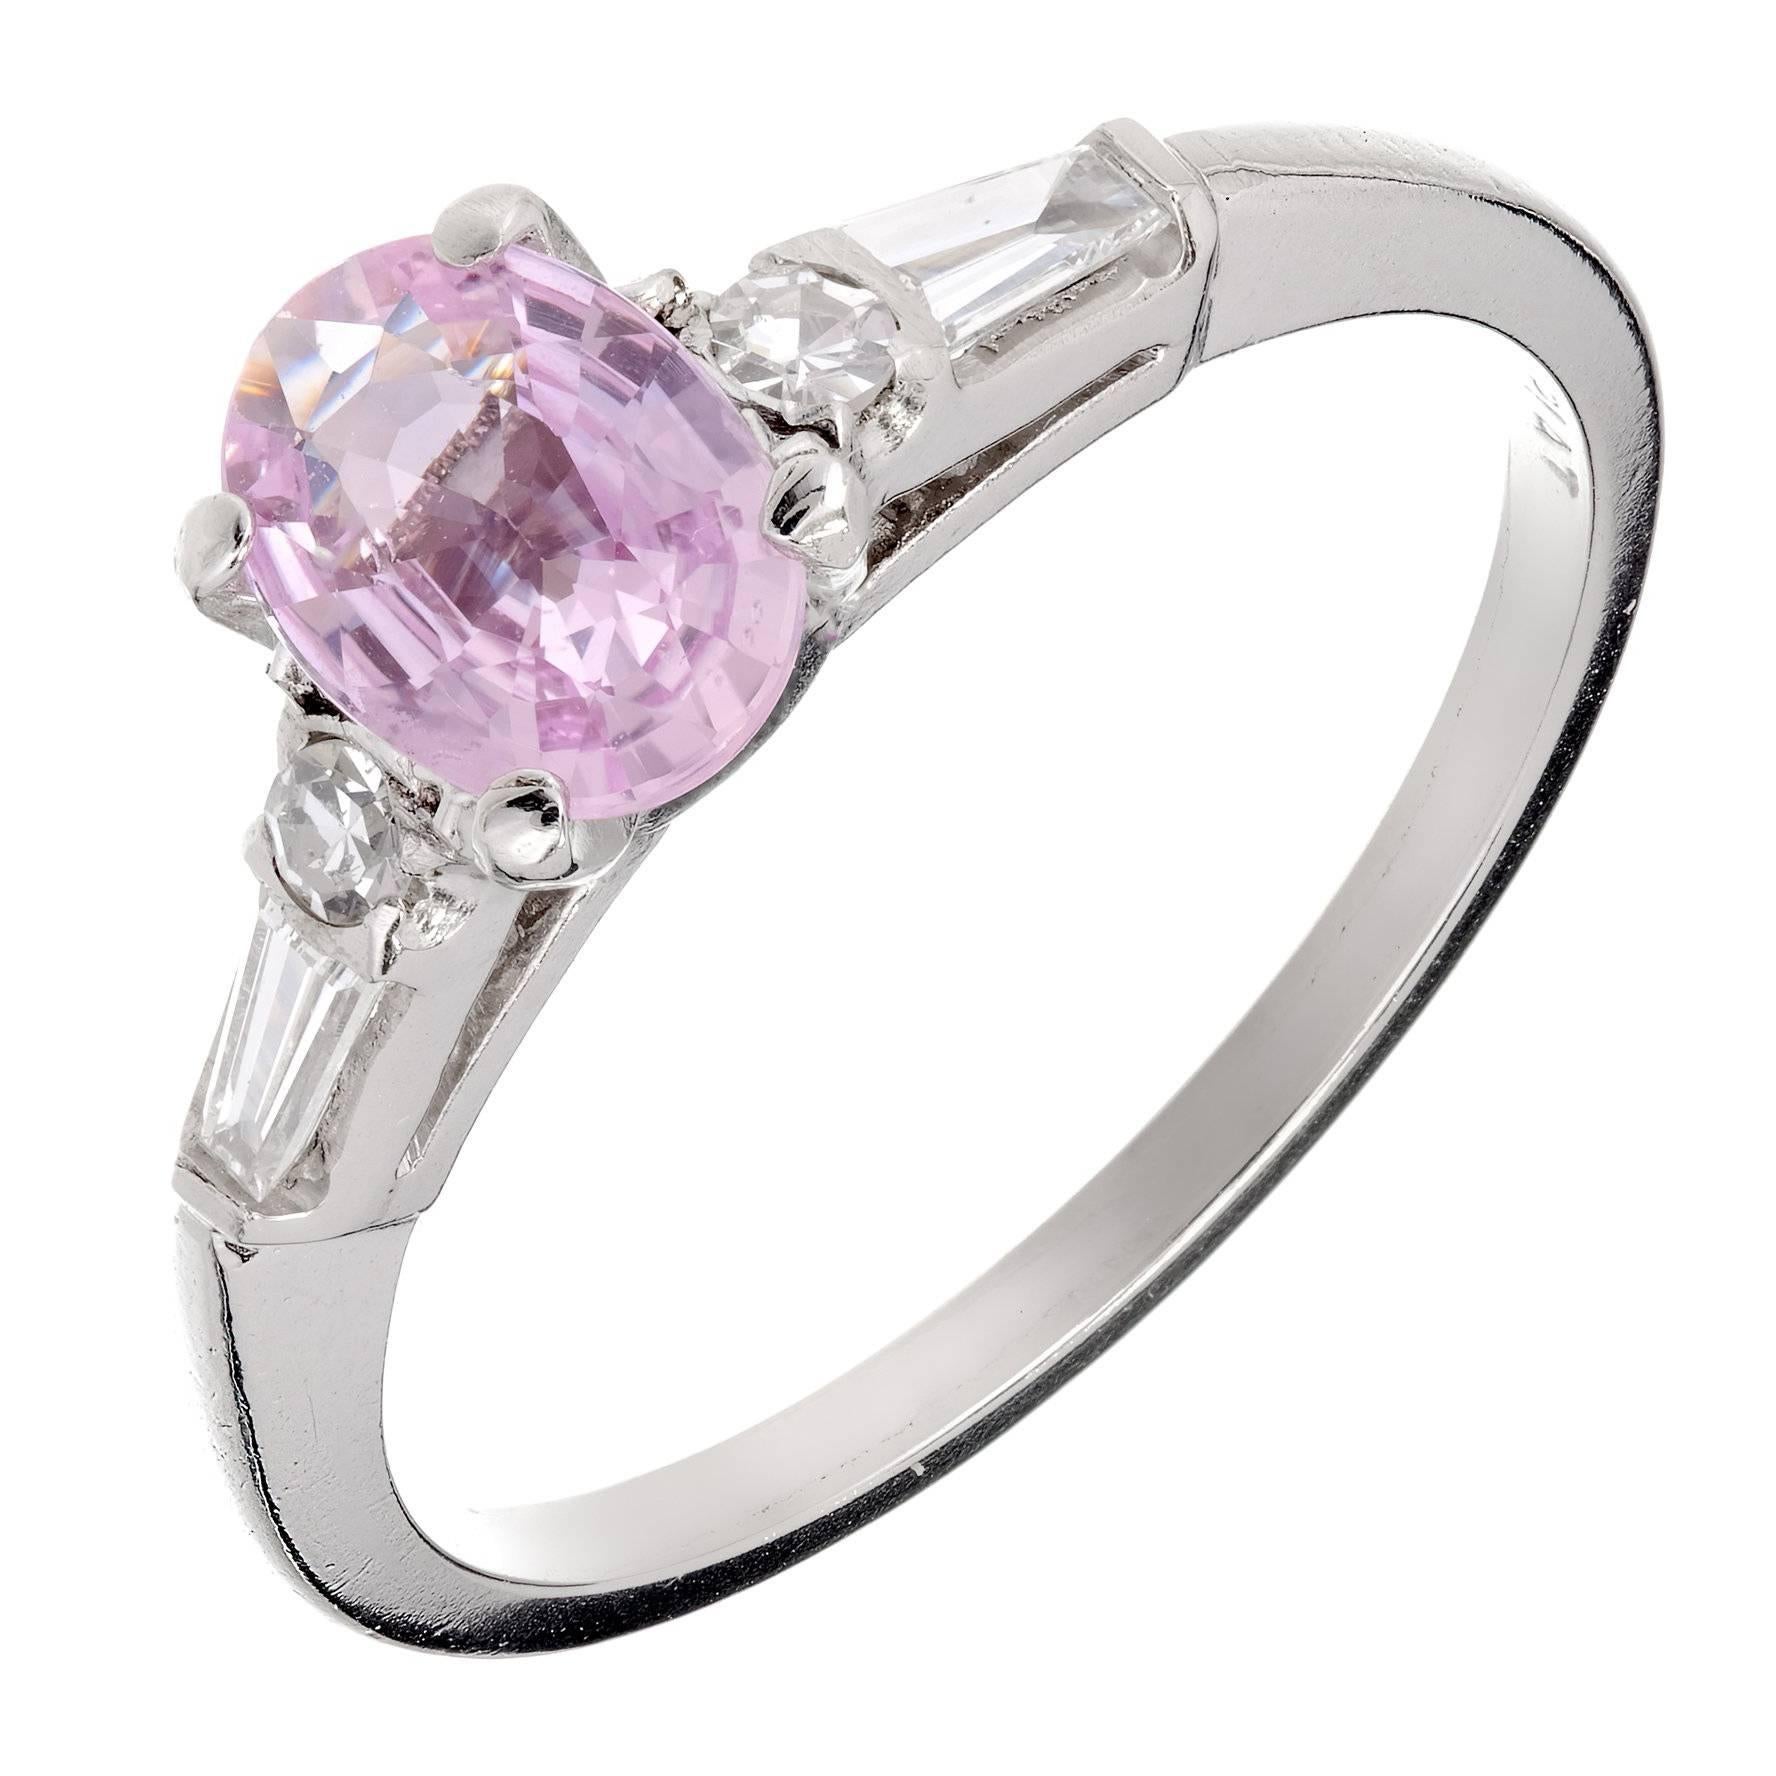 Peter Such GIA Certified Pink Sapphire Diamond Platinum Engagement Ring